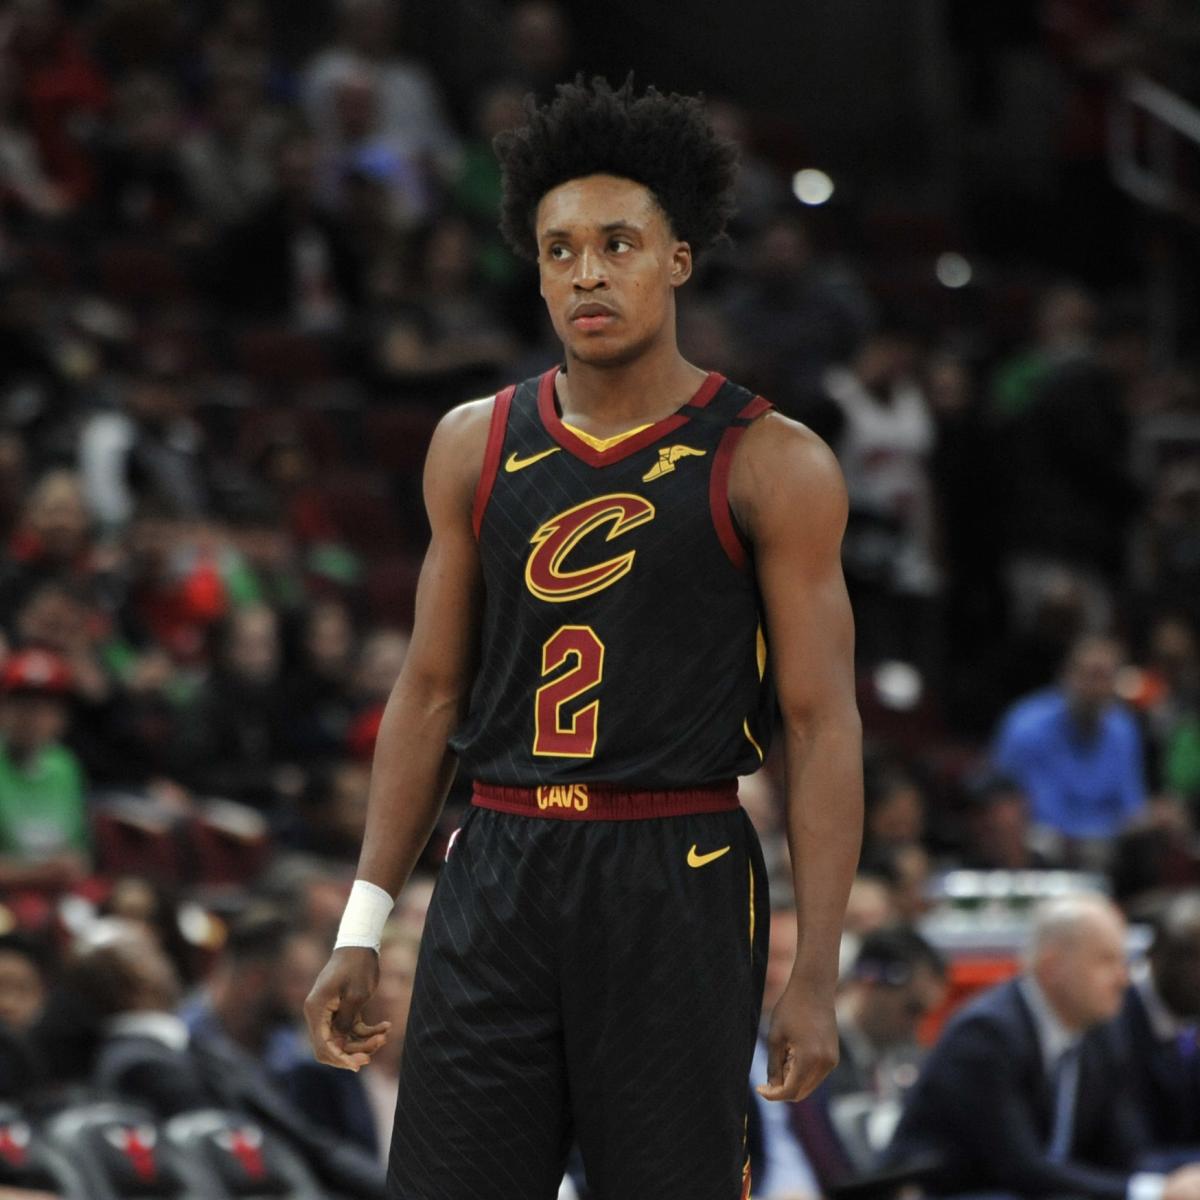 Dispute: Cavs’ Collin Sexton May well per chance per chance per chance now not Play vs. Bulls Due to ‘Minor’ Hamstring Anguish